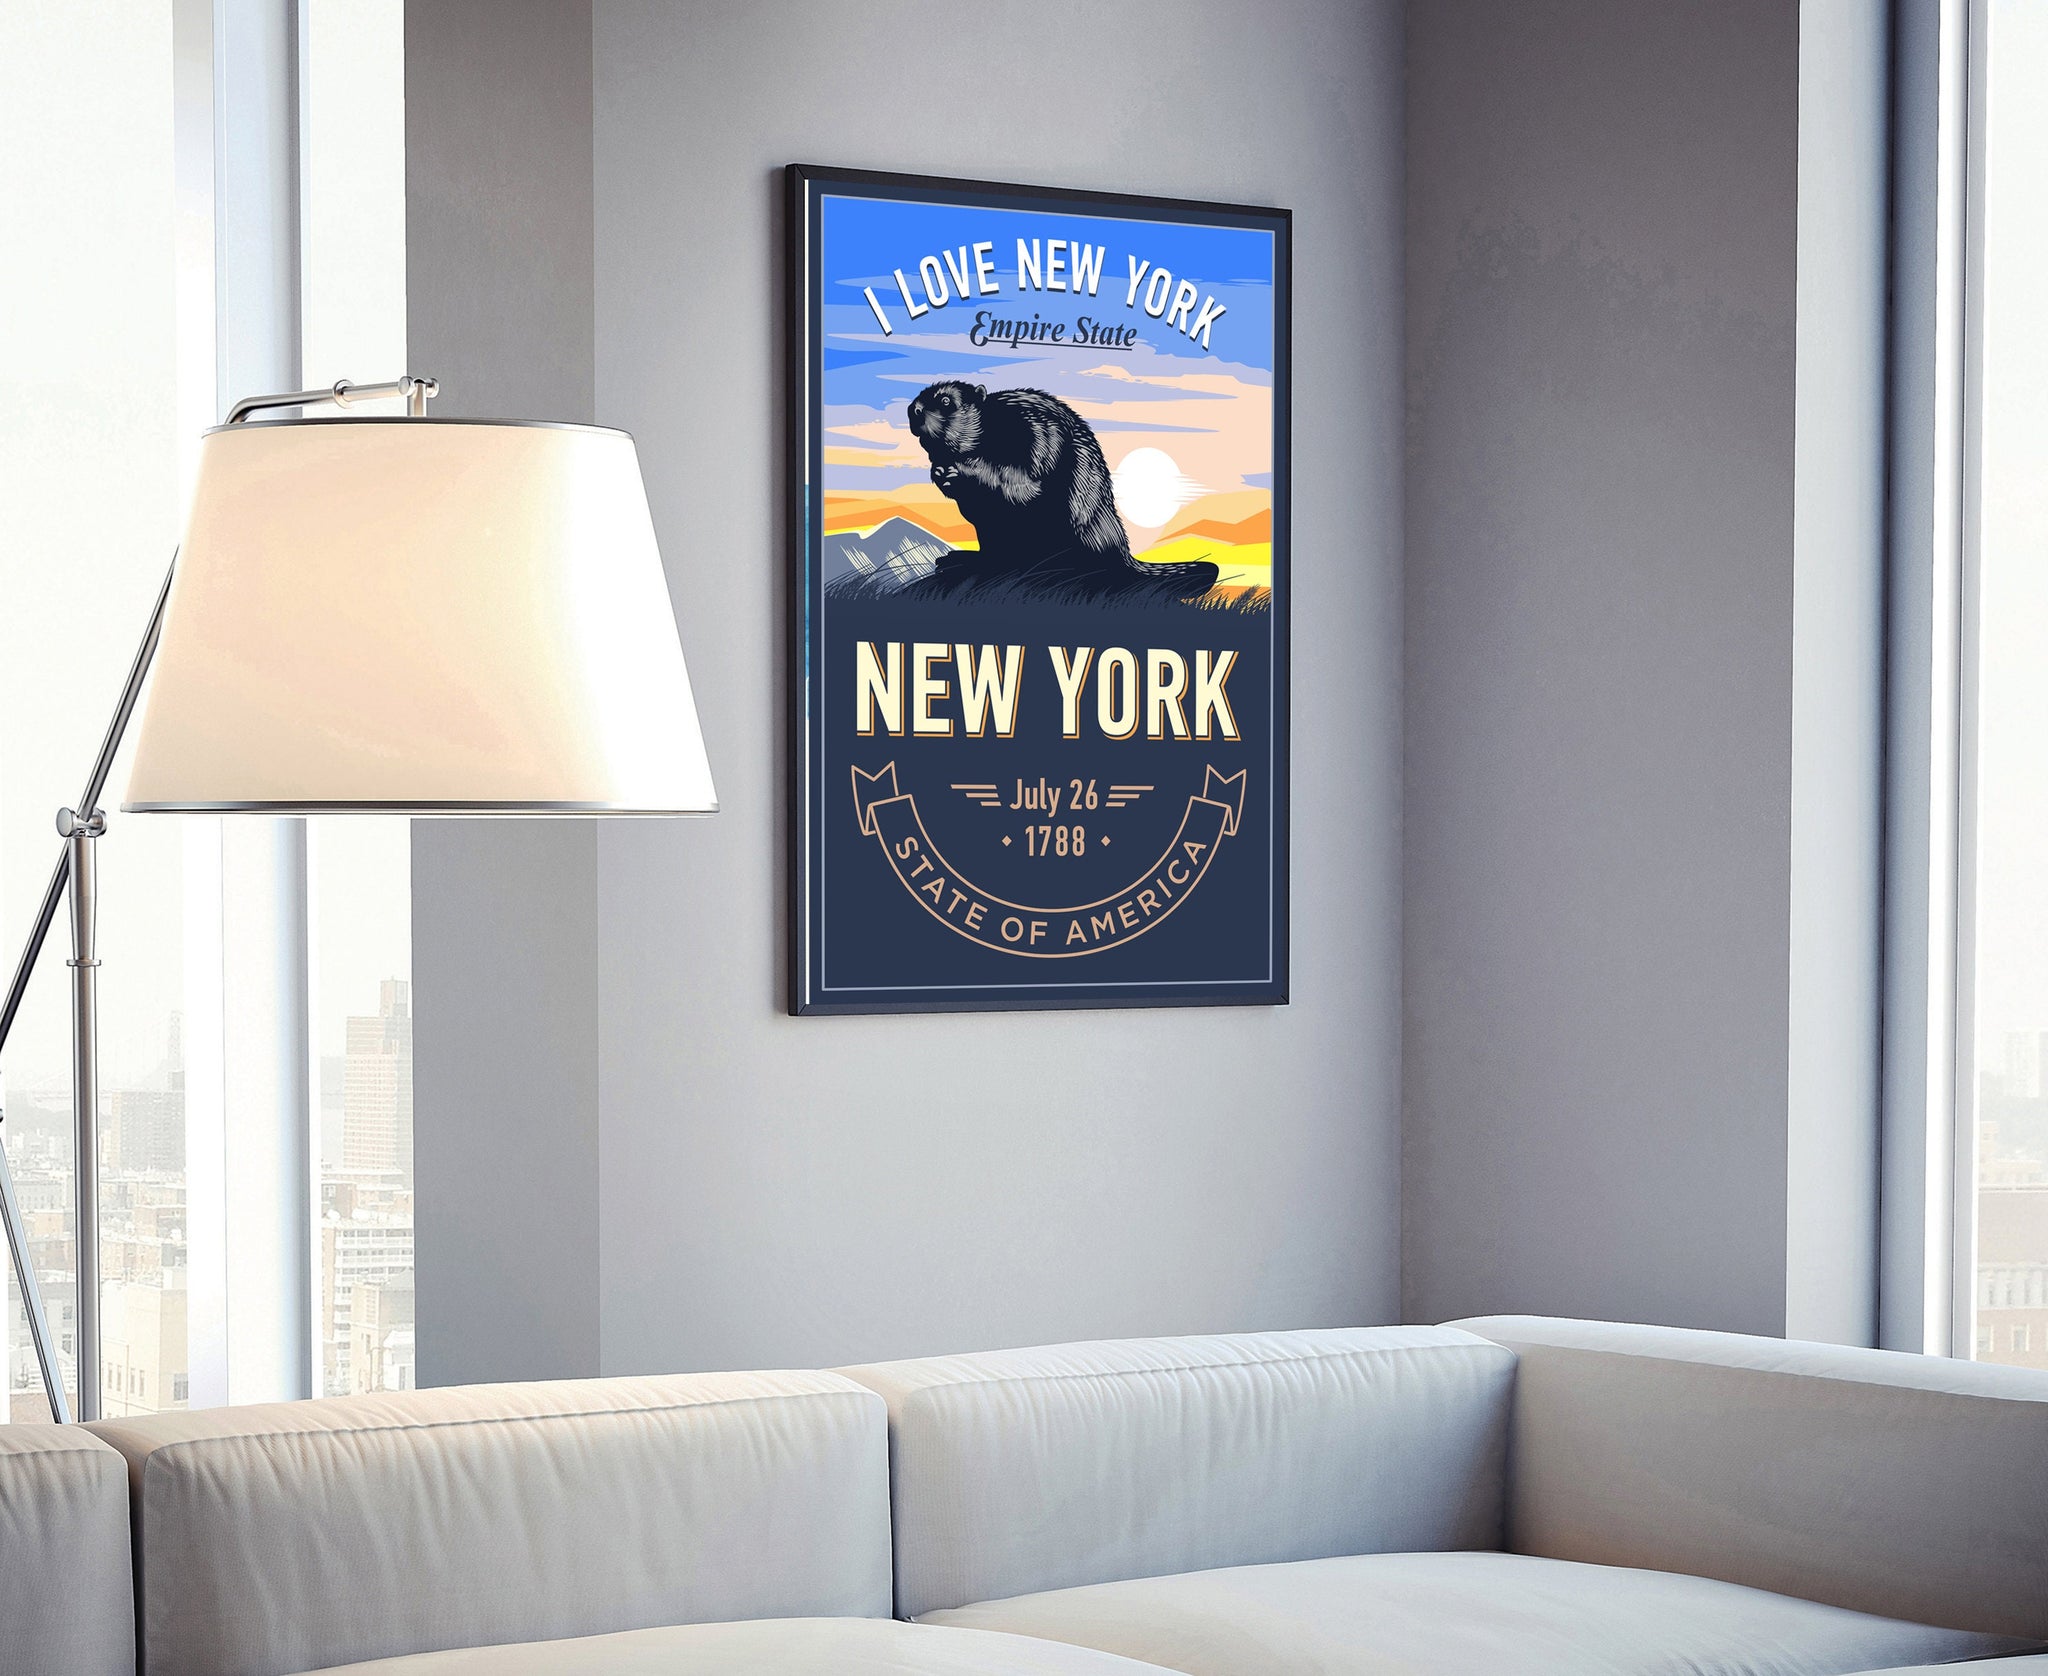 United States Poster, New York State Poster Print, New York State Emblem Poster, Retro Travel State Poster, Home Wall Art, Office Wall Art